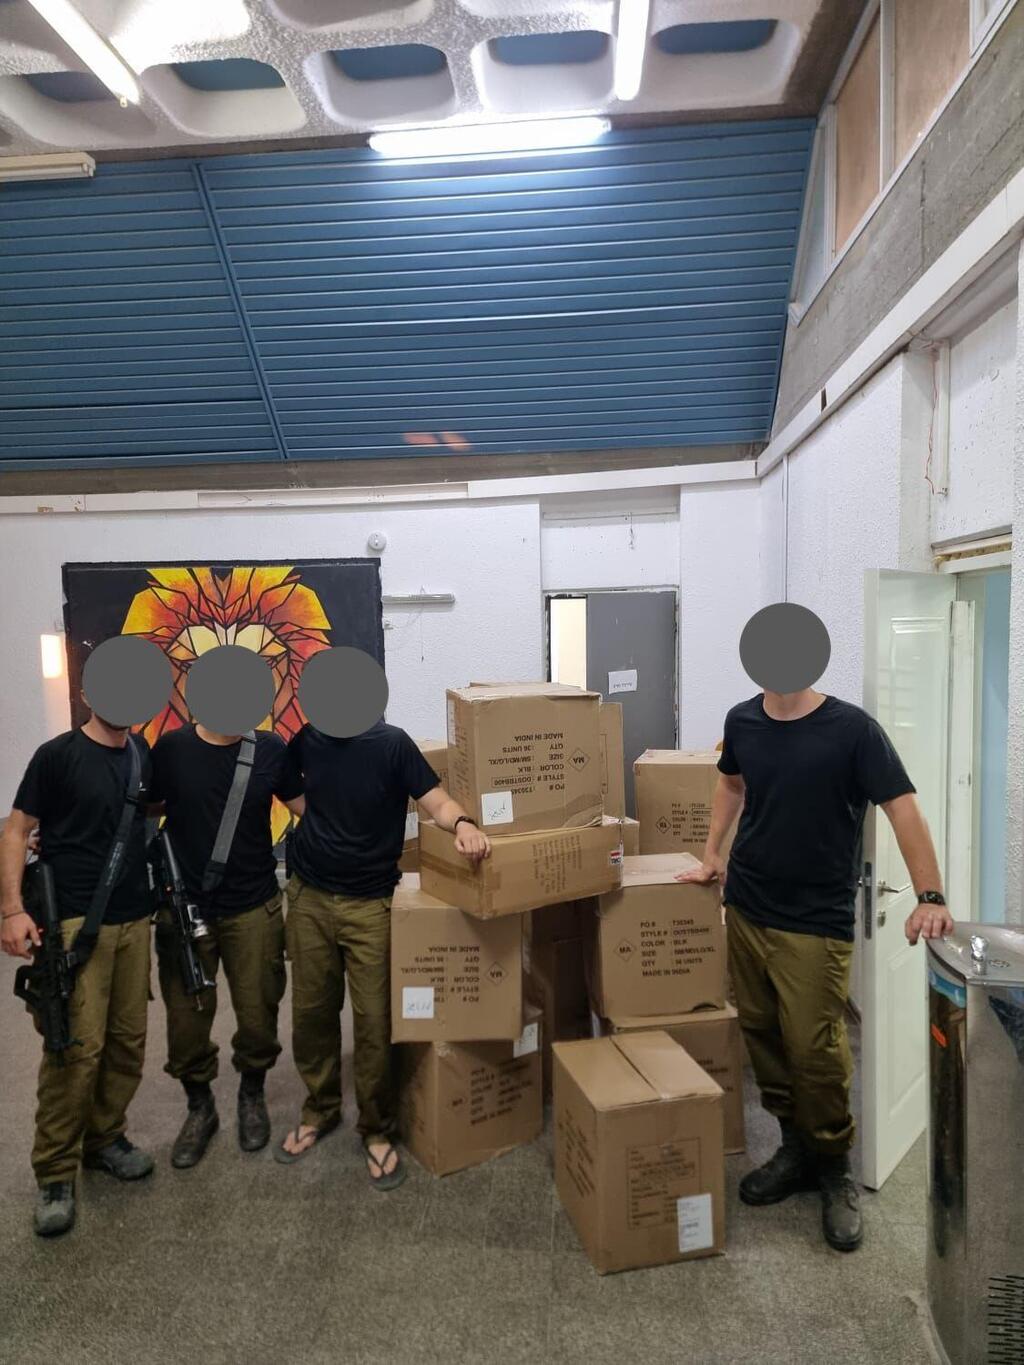 Donations to IDF from across the world